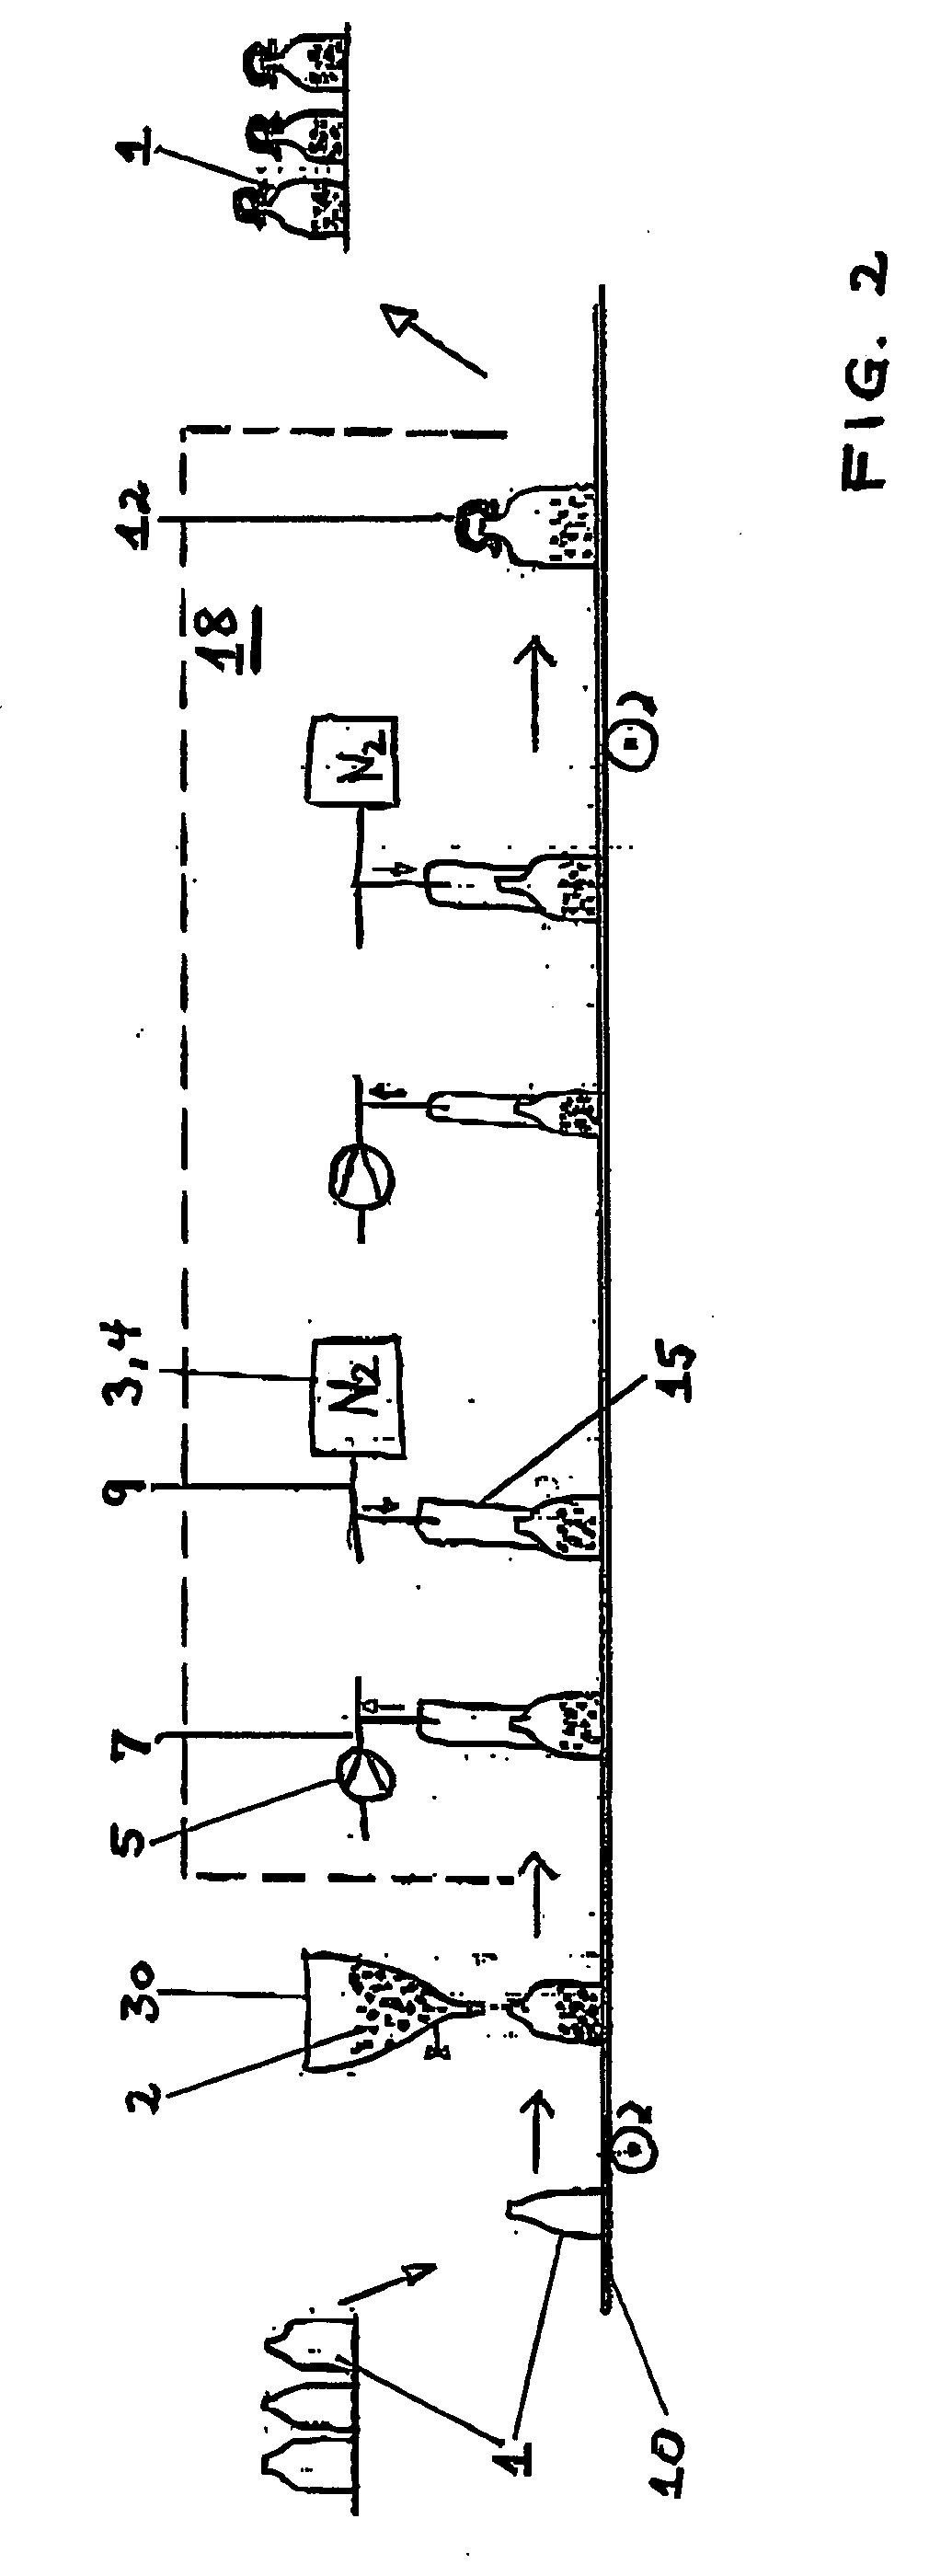 Method and apparatus for cleaning containers to be sealed and containing a filler from oxygen gas